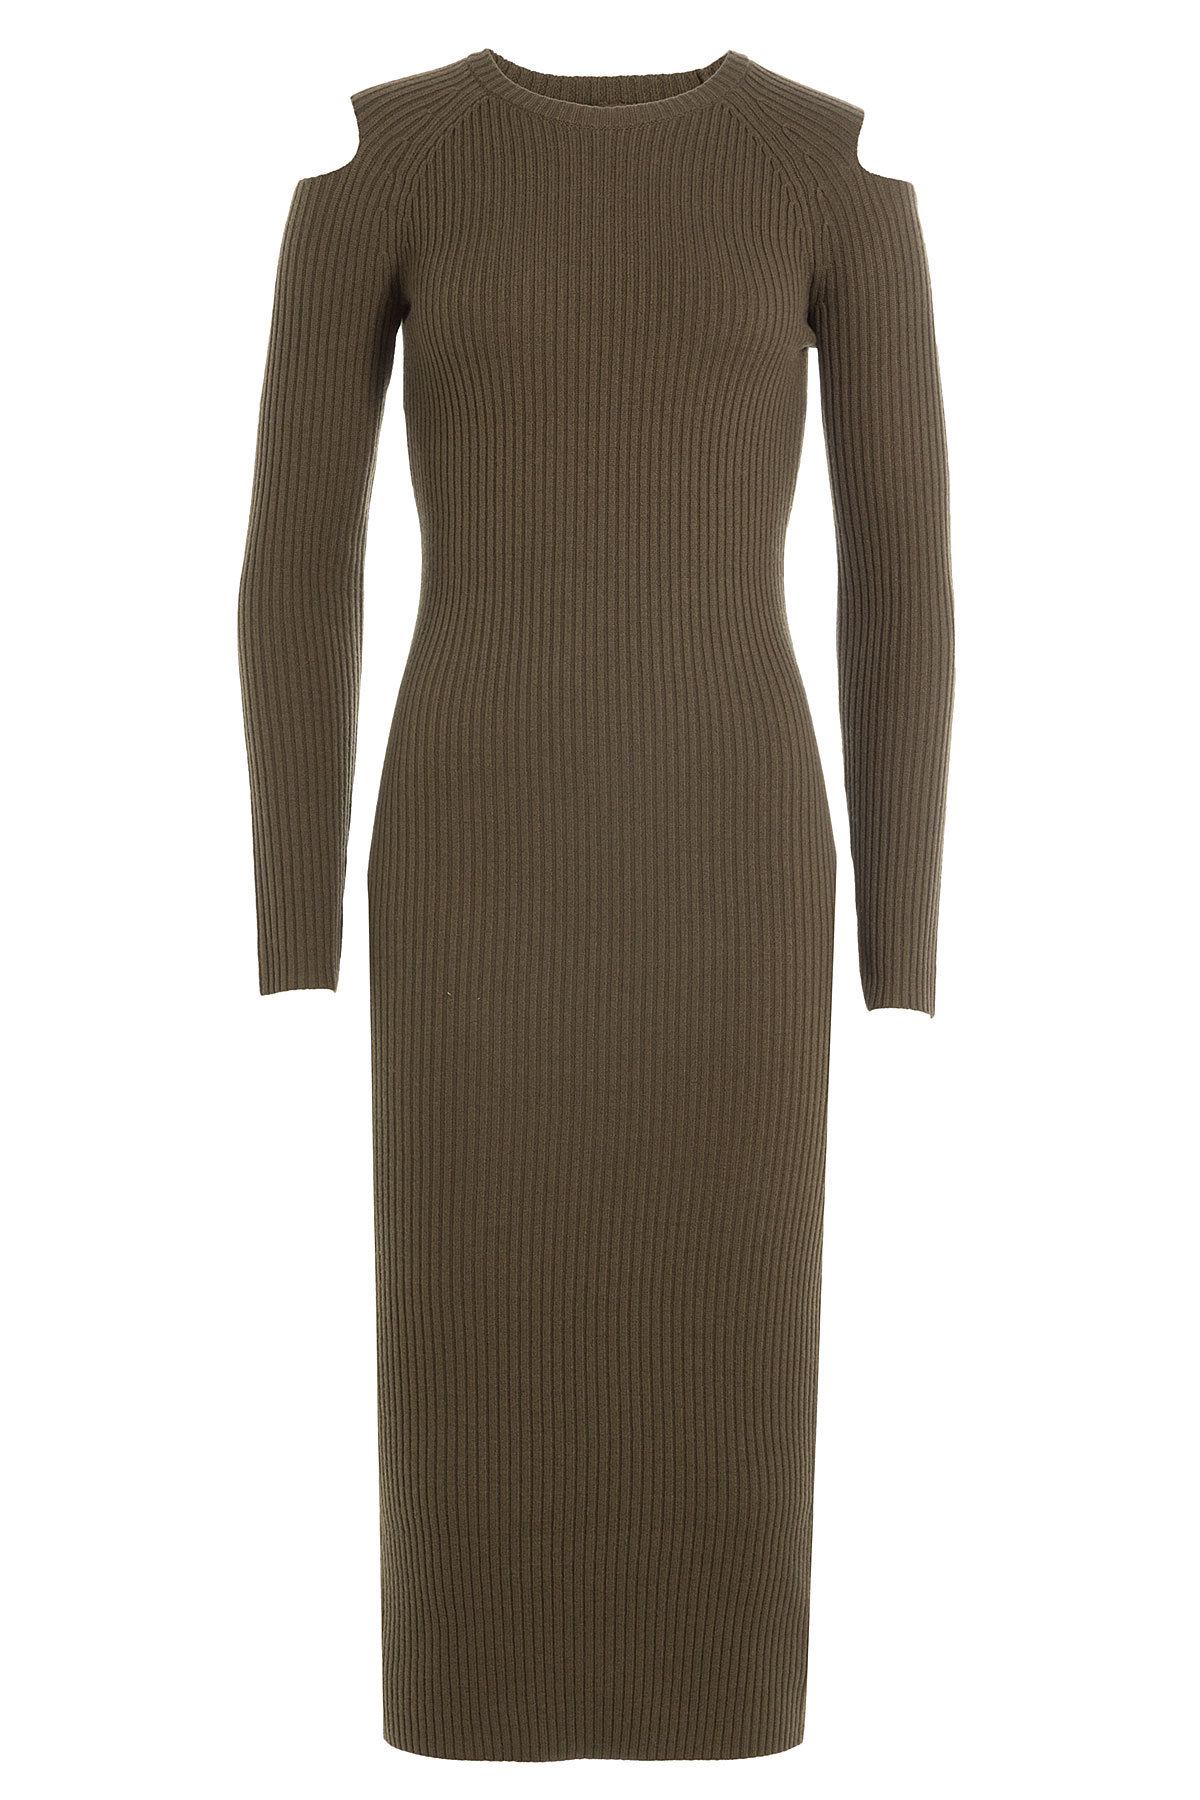 Theory - Wool Dress with Cut-Out Shoulders